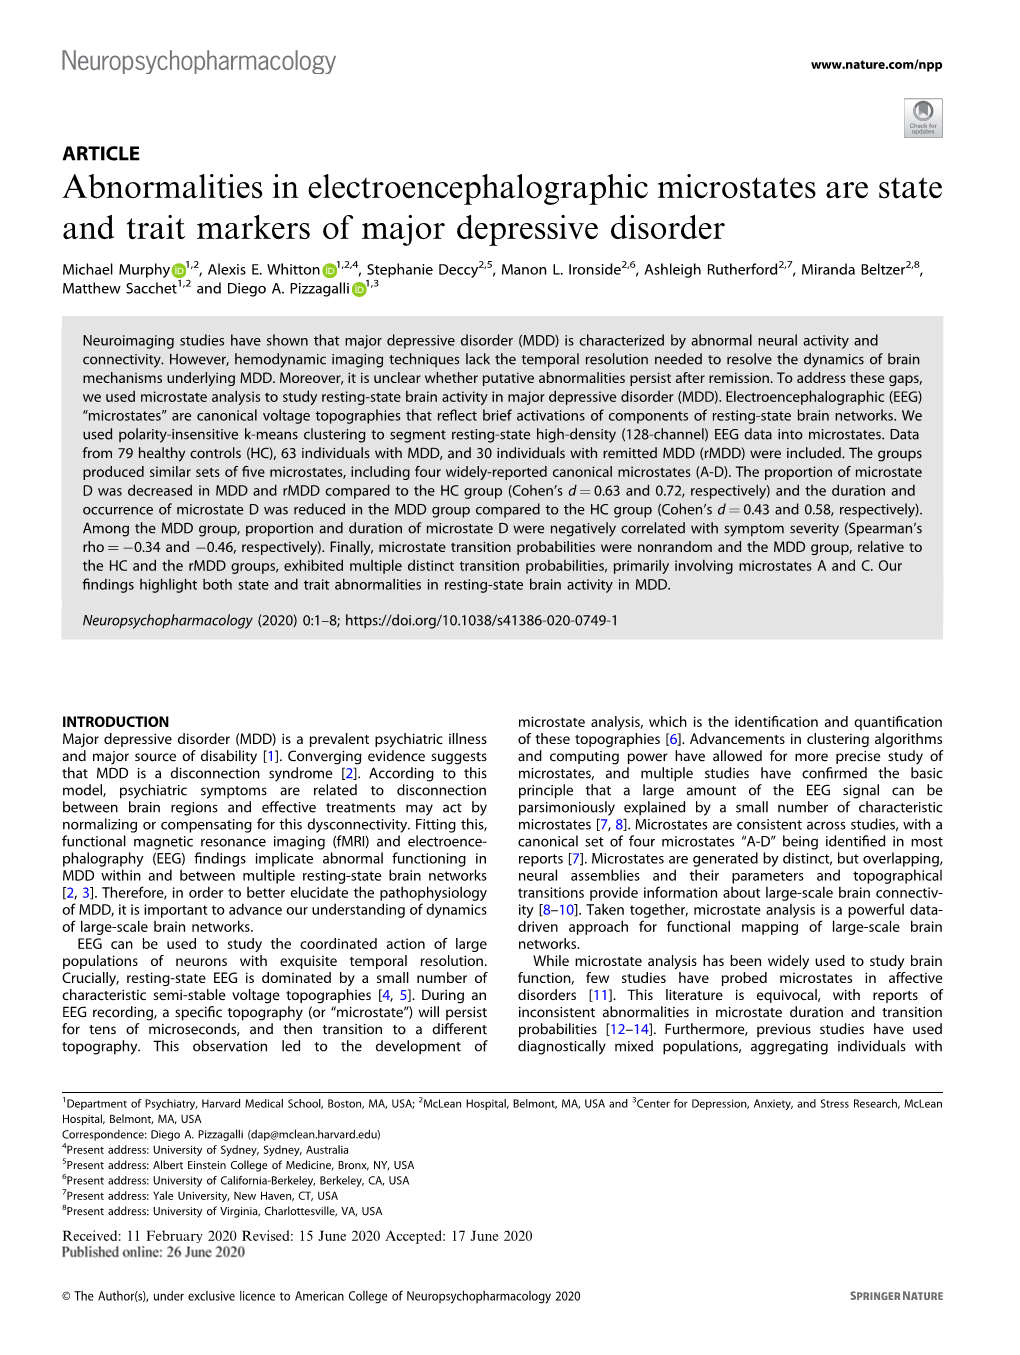 Abnormalities in Electroencephalographic Microstates Are State and Trait Markers of Major Depressive Disorder